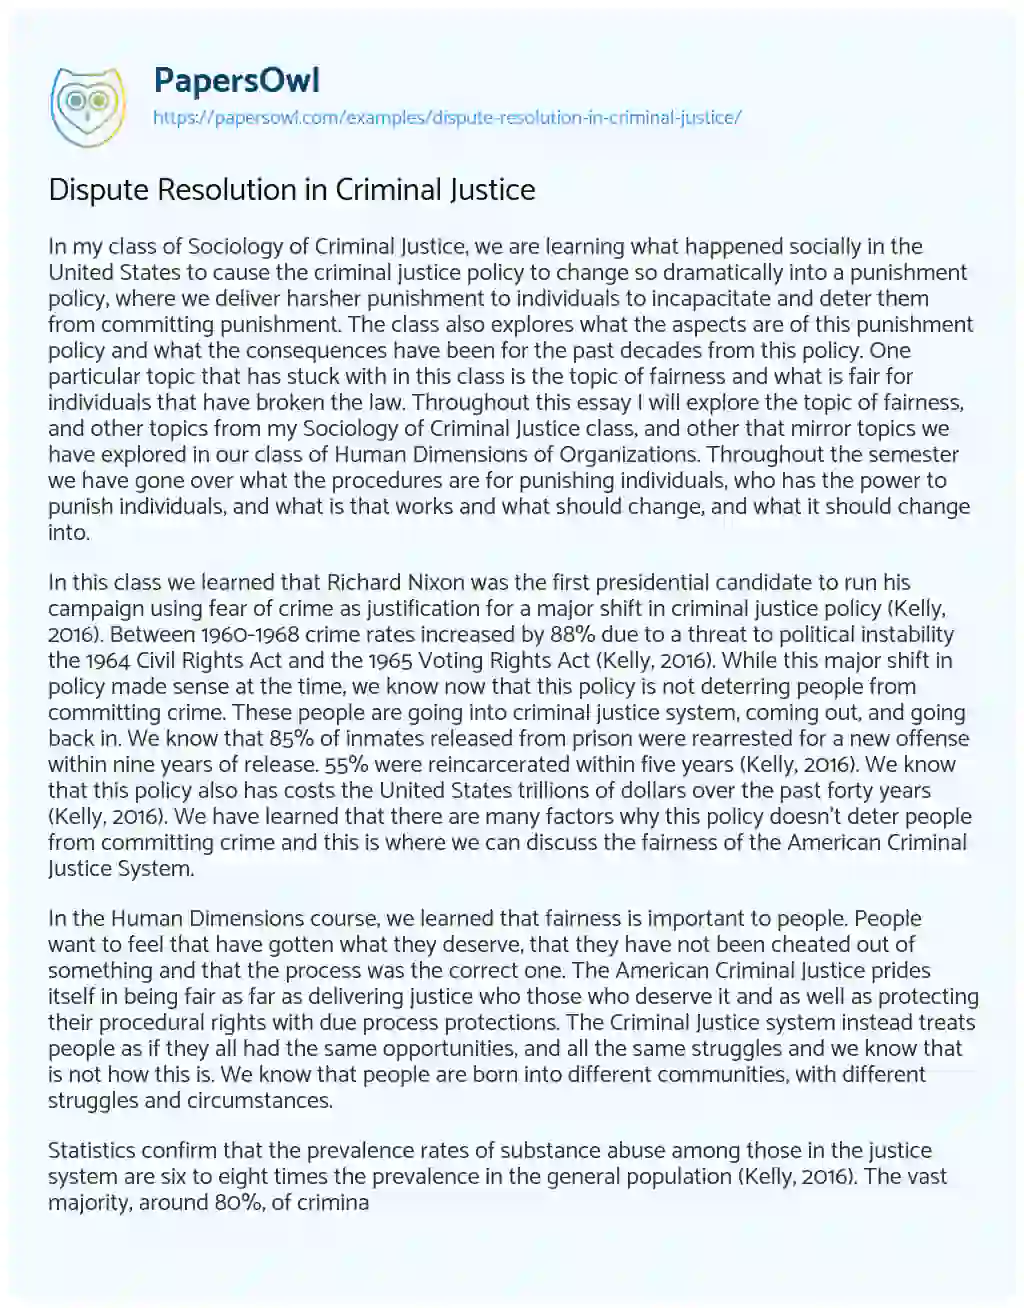 Essay on Dispute Resolution in Criminal Justice